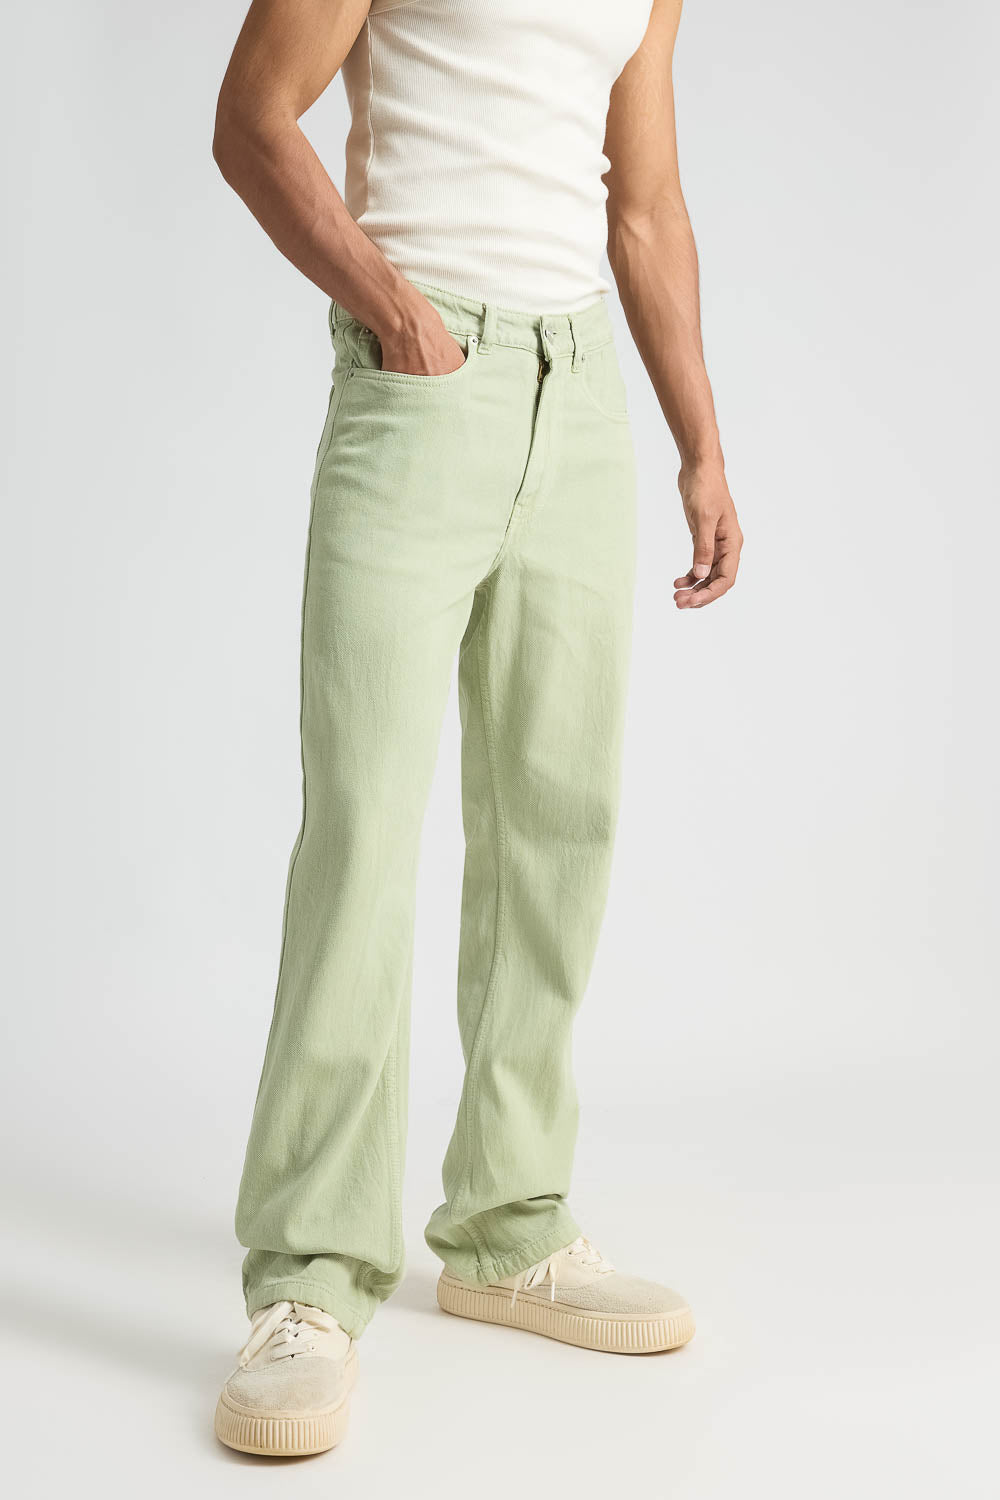 Sage Green Men's Straight Fit Jeans